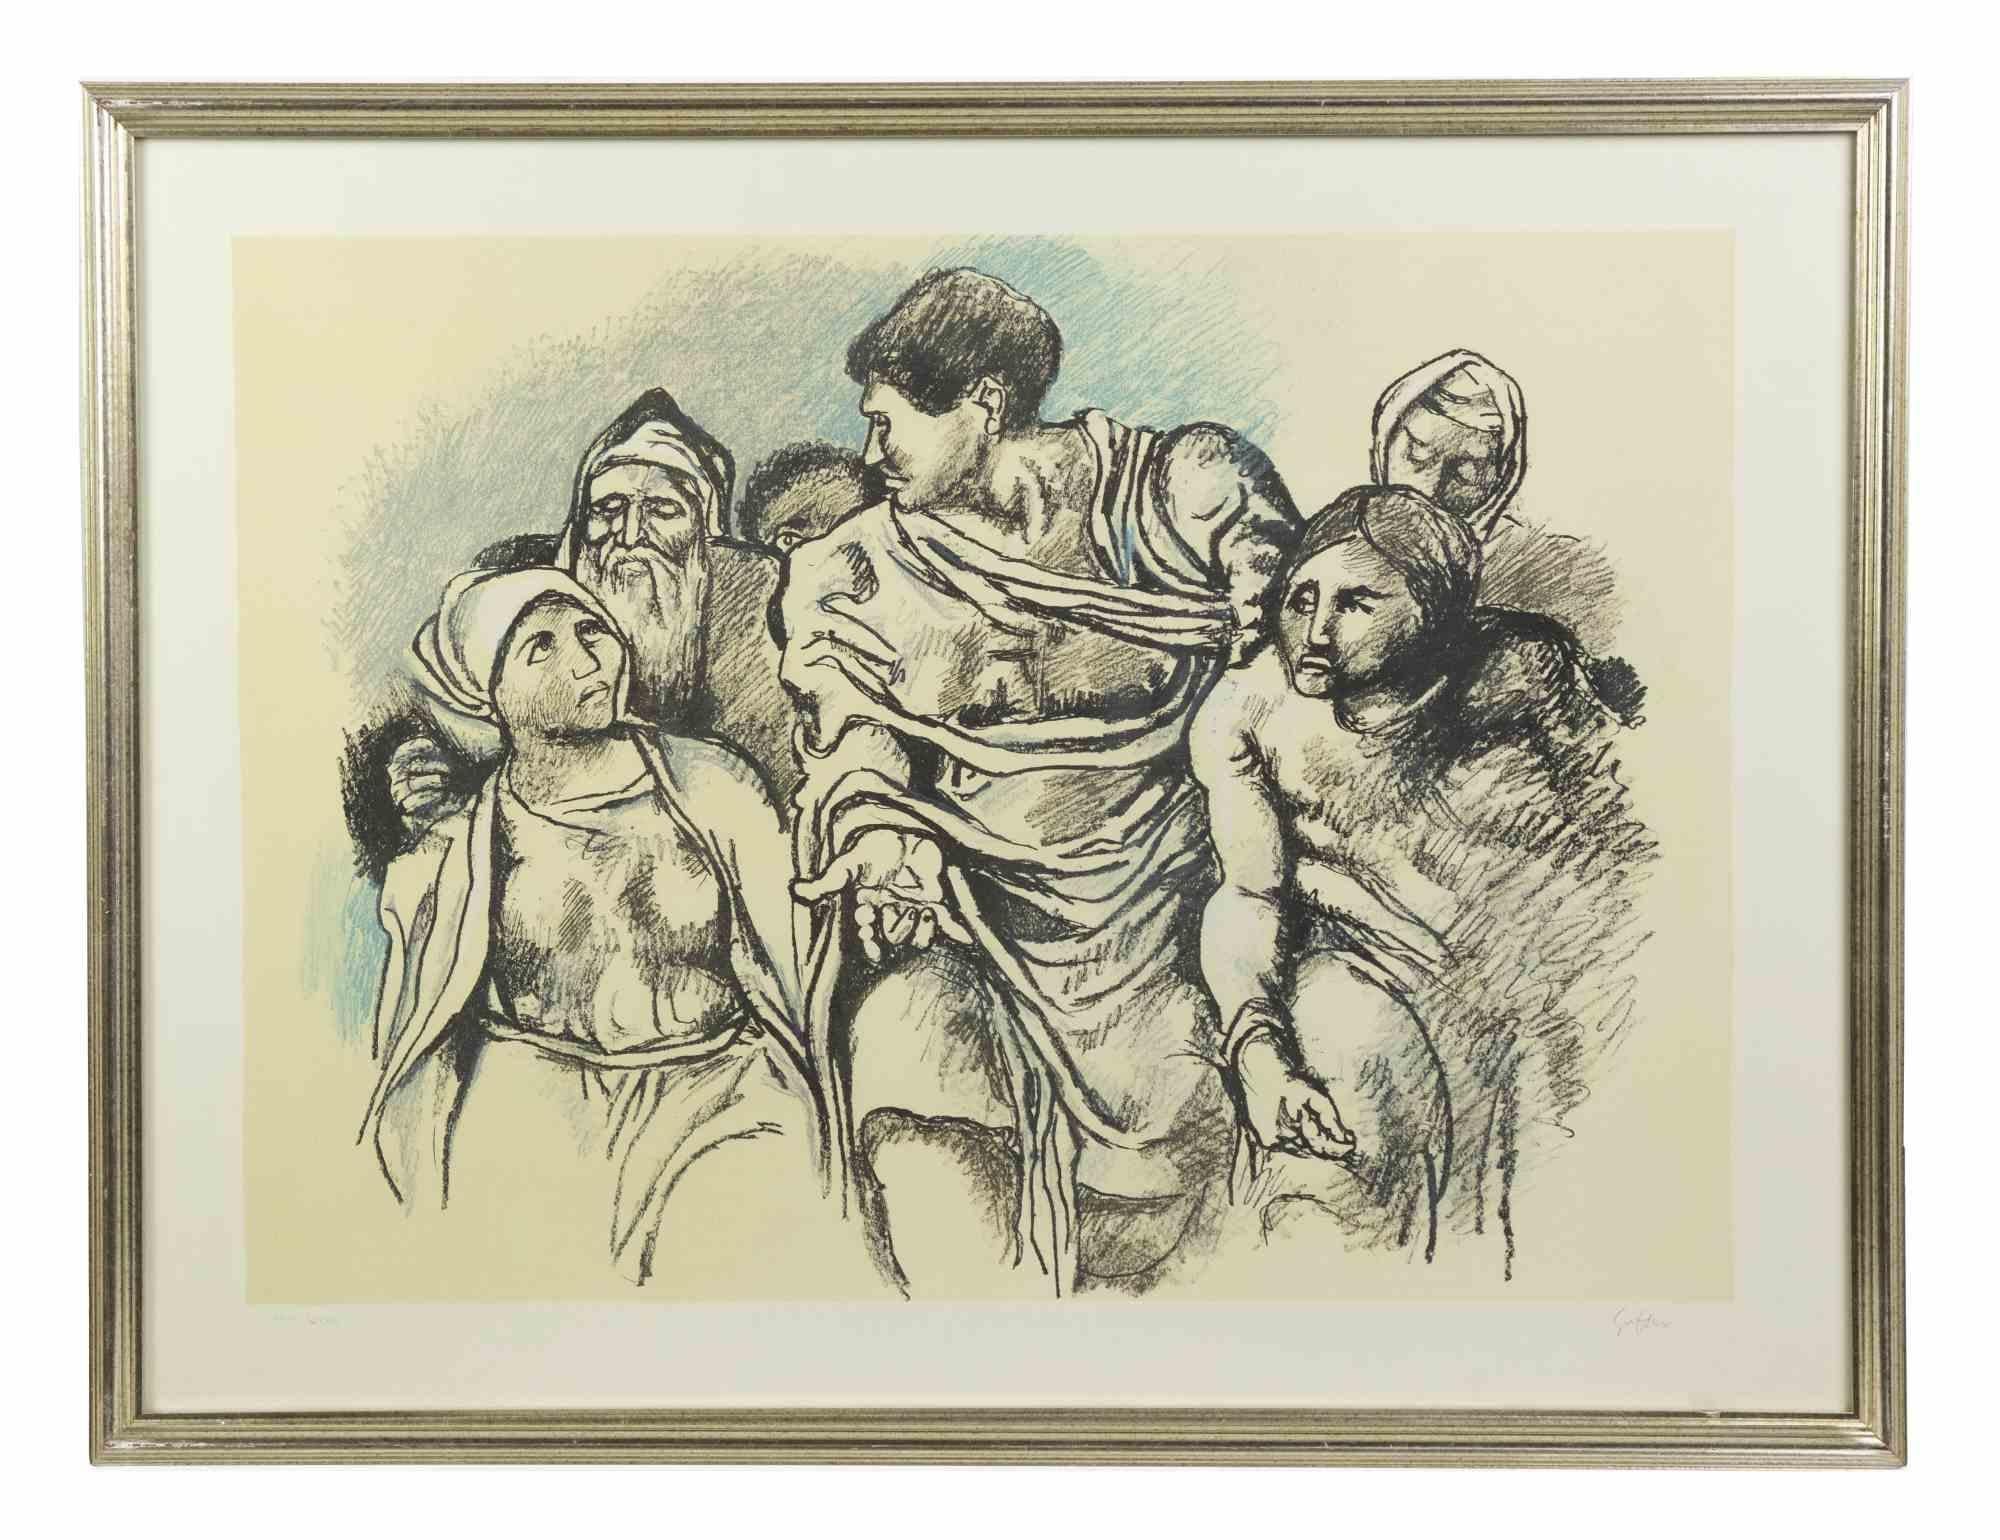 Homage to Michelangelo is an original Contemporary artwork realized in the 1970s by Renato Guttuso (Bagheria, December 26, 1911 - Rome, January 18, 1987).

Original Colored Etching on paper.

Dimensions: 85 x 65 cm.  

Frame is included.